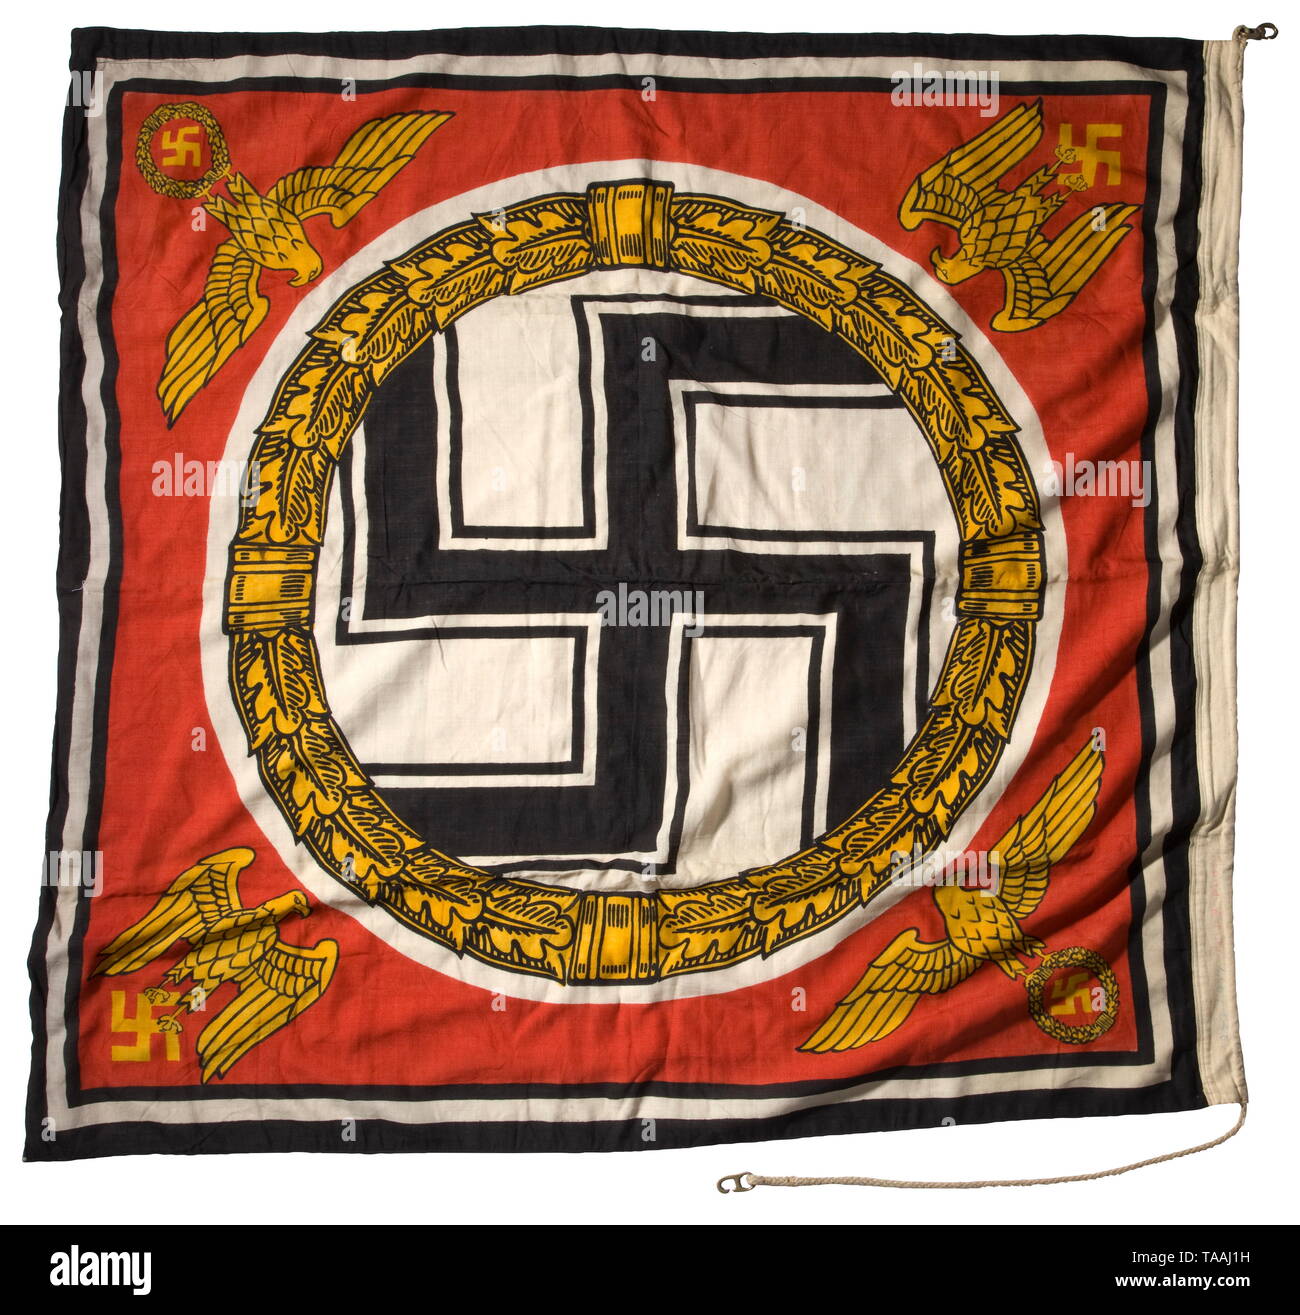 A Führer standard from the heavy cruiser 'Prinz Eugen' Colour-imprinted naval flag cloth, the left side lettered 'Stand. d. Führ. 1,5 x 1,5' with naval acceptance stamp. Colour-fresh, slightly stained, small moth traces. Included is the flag display decree for the 'Prinz Eugen' for the future memorial days of the Battle of Jutland (tr.) 'In honour of those who were killed in action in the World War under the imperial and royal Austrian war flag, on 31 May this flag is set on the main topmast instead of the imperial war flag aboard the heavy cruiser 'Prinz Eugen', Führer 20t, Editorial-Use-Only Stock Photo